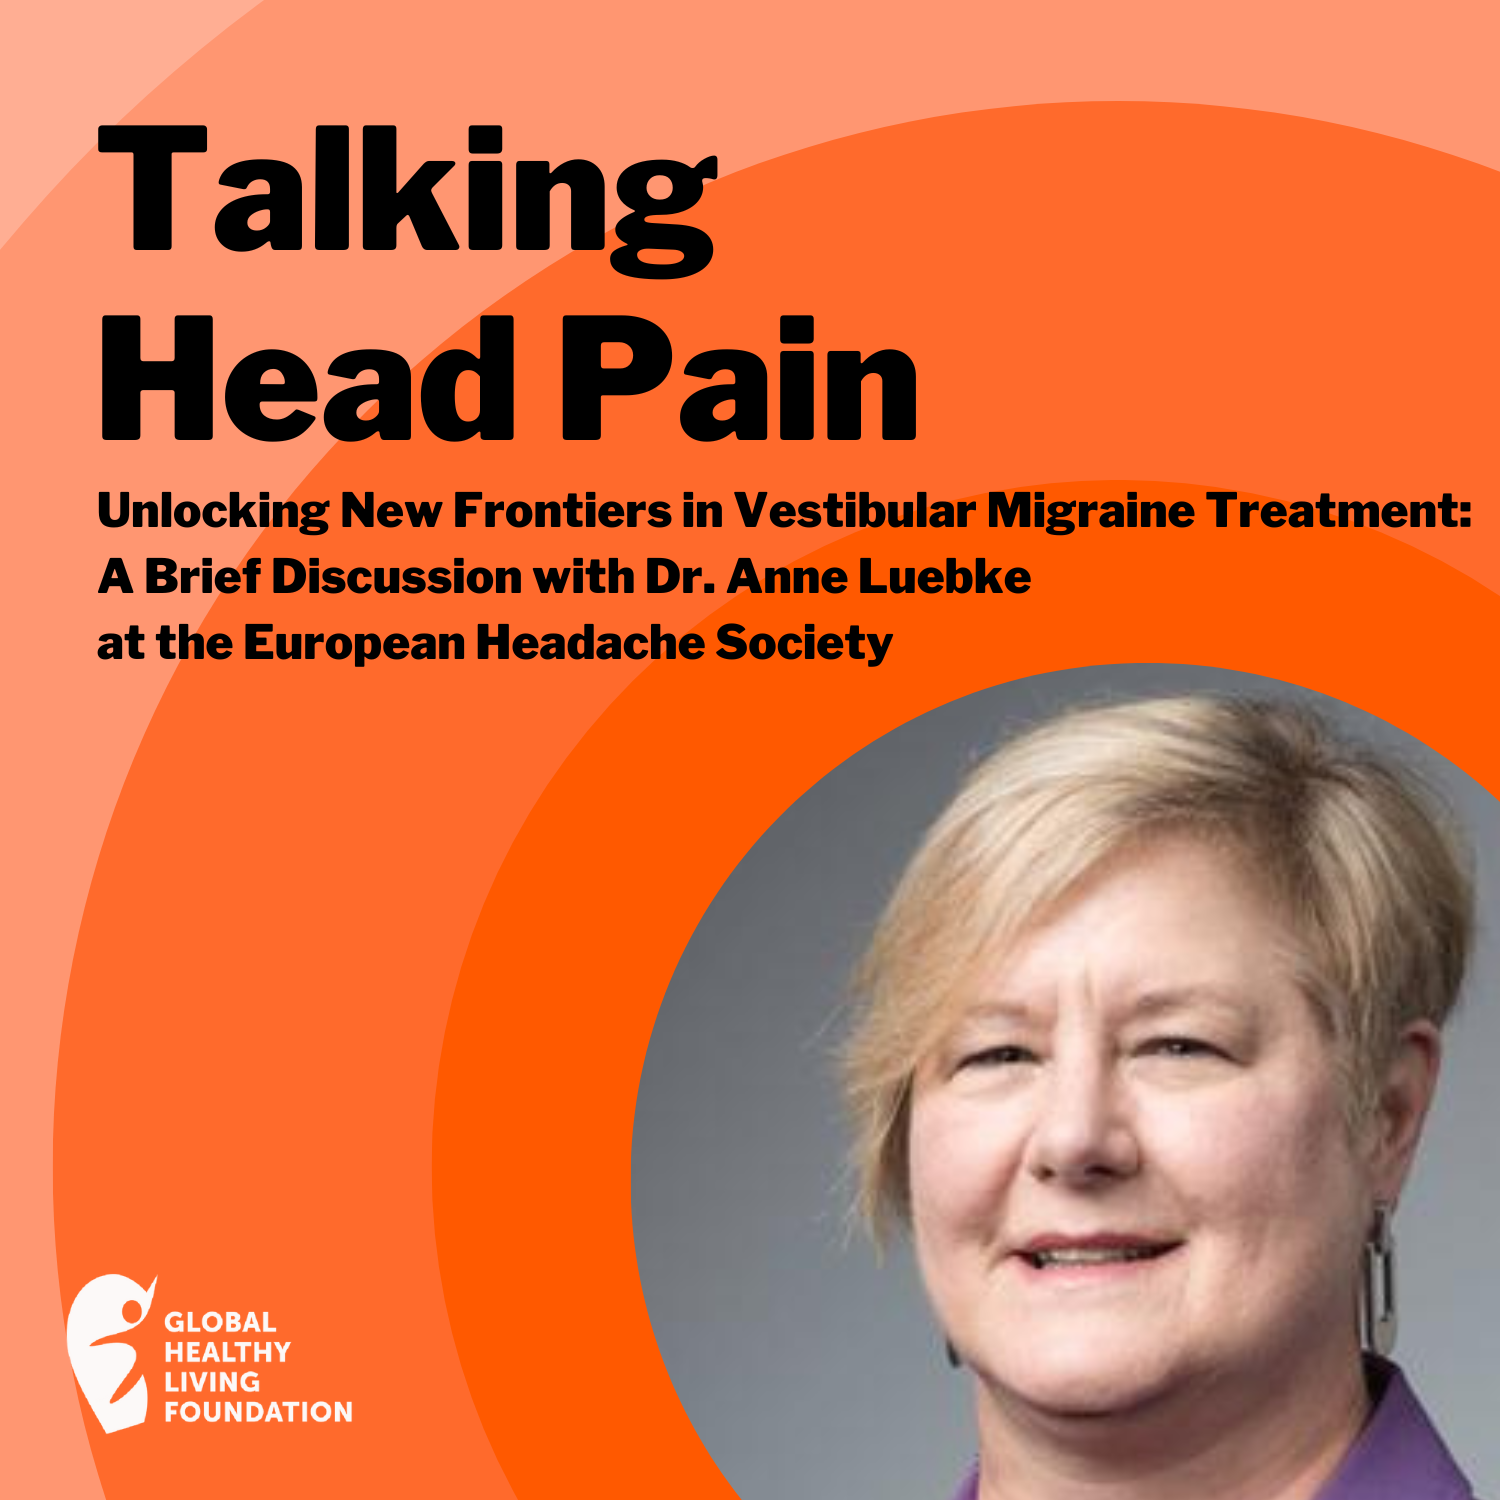 Unlocking New Frontiers in Vestibular Migraine Treatment: A Brief Discussion with Dr. Anne Luebke at the European Headache Society